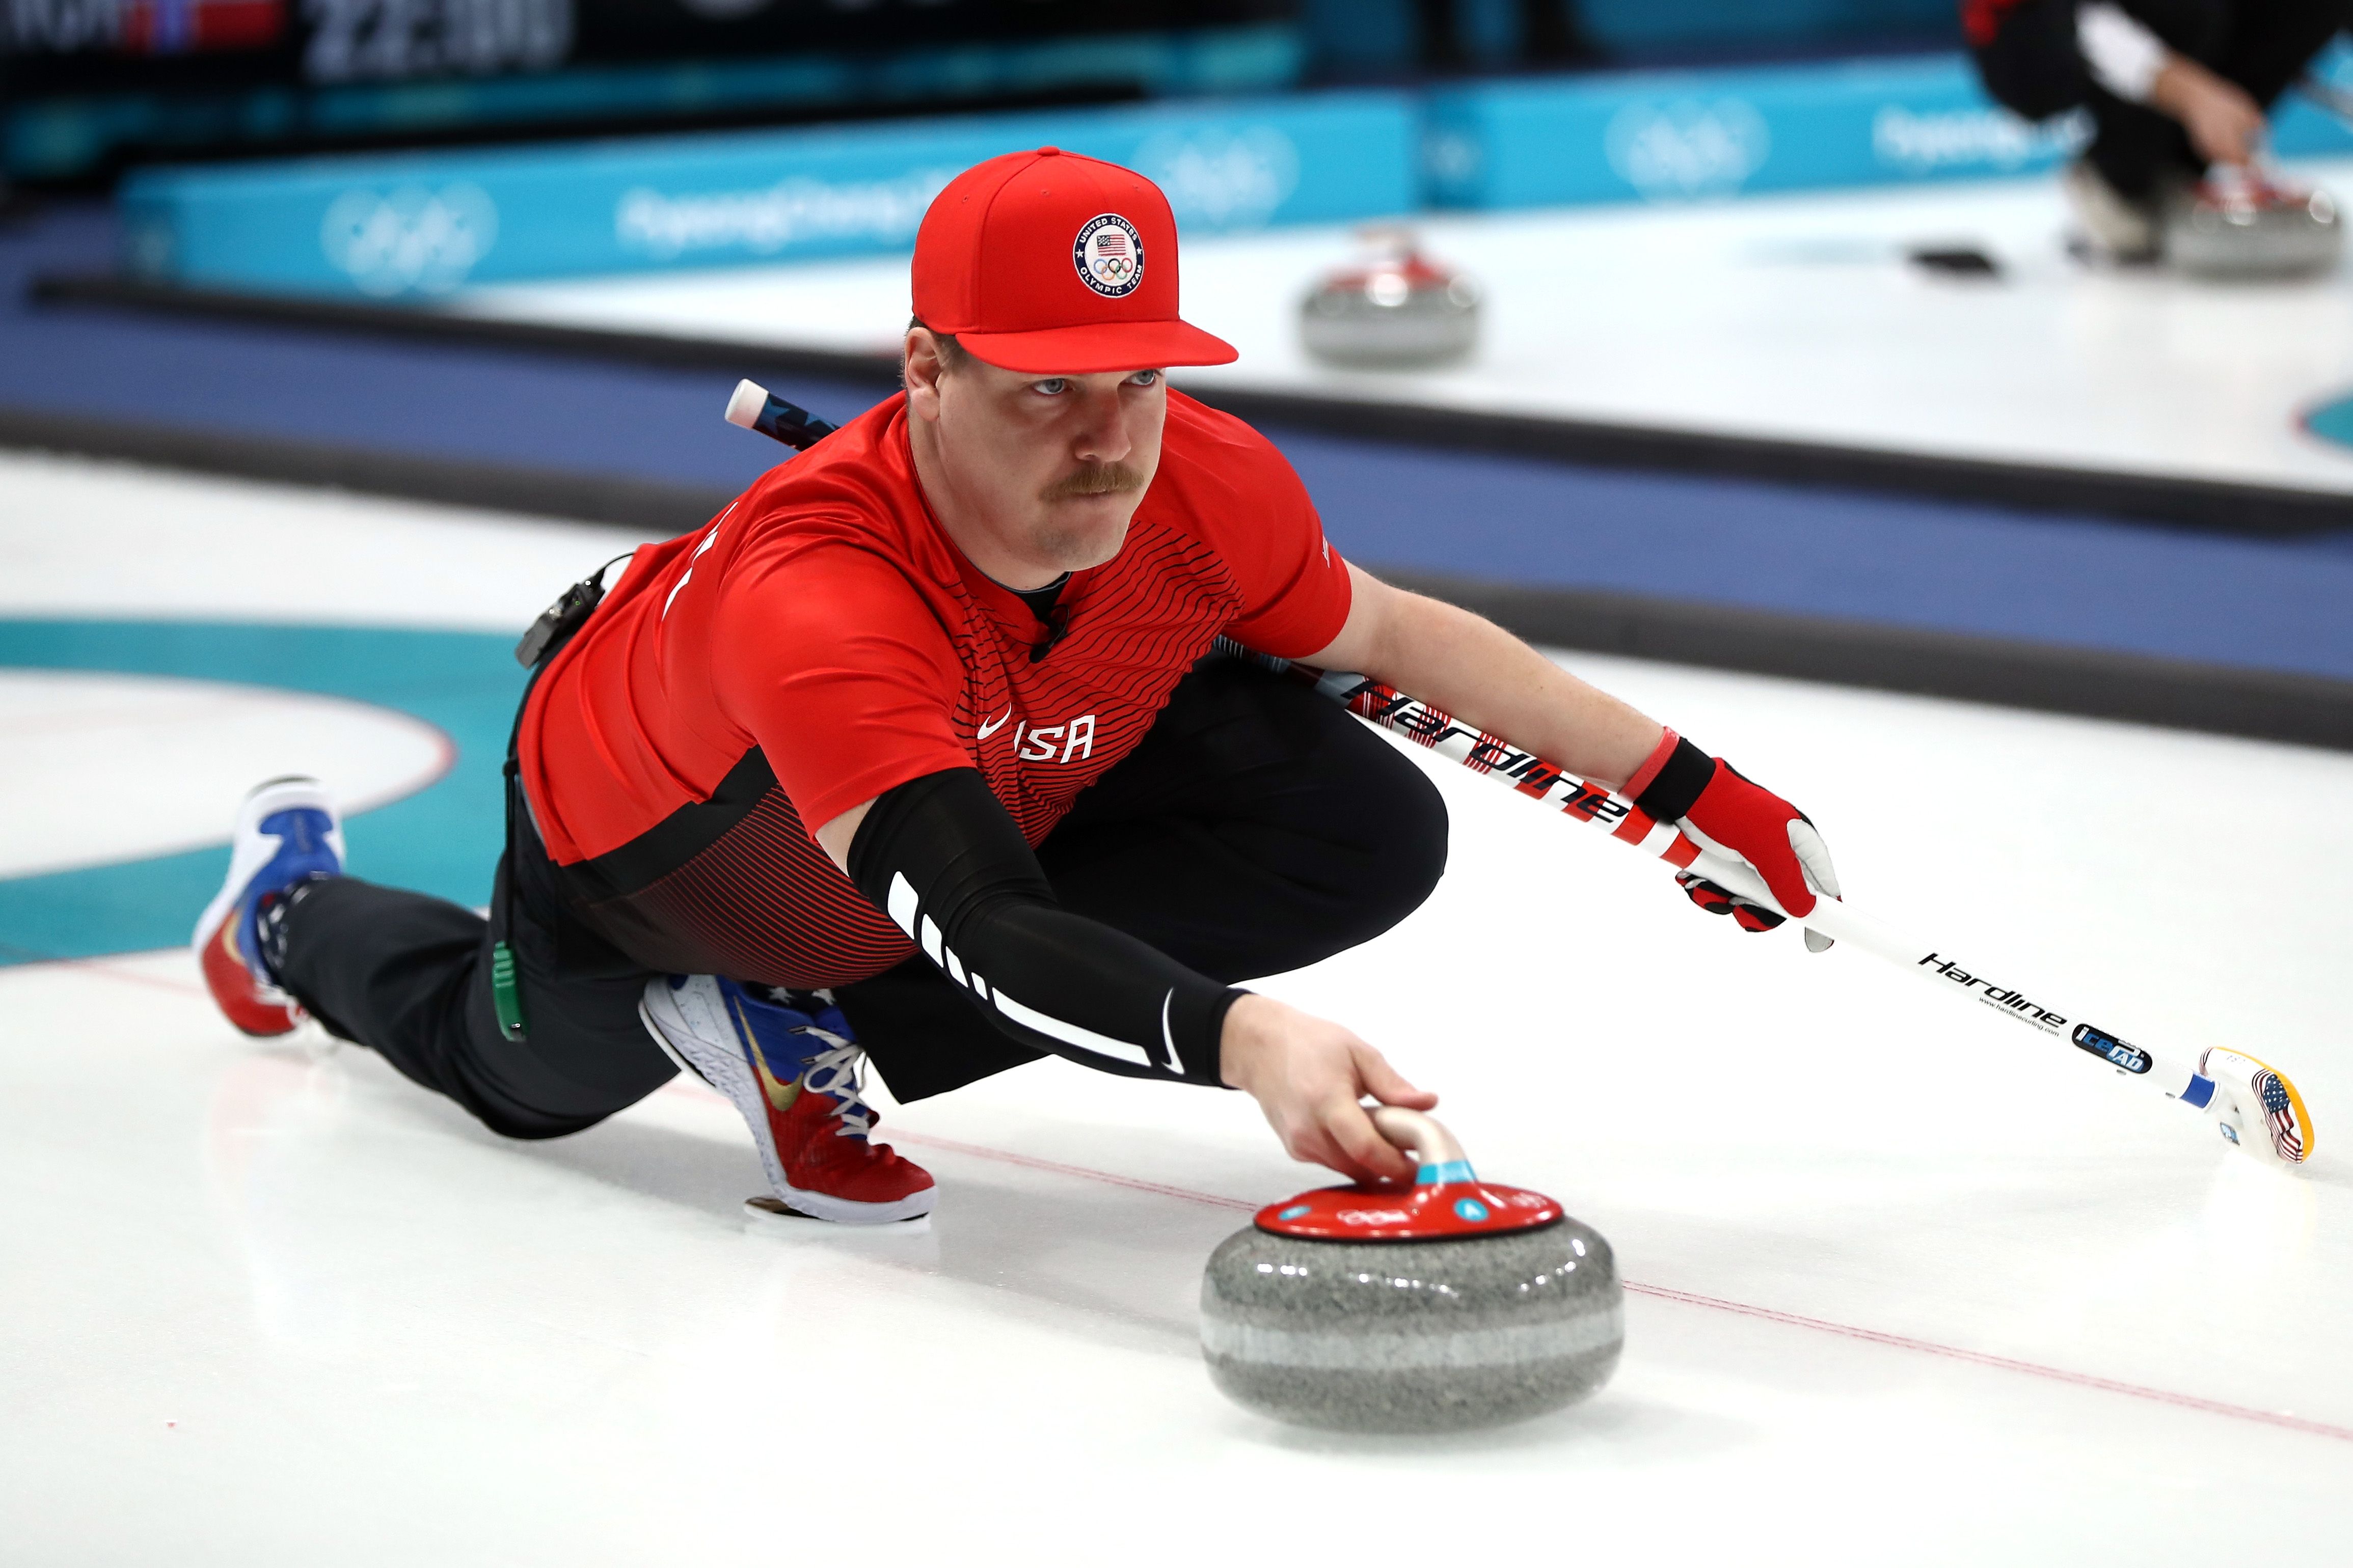 Here's All About Curling The Unique Sport Played At The Winter Olympics